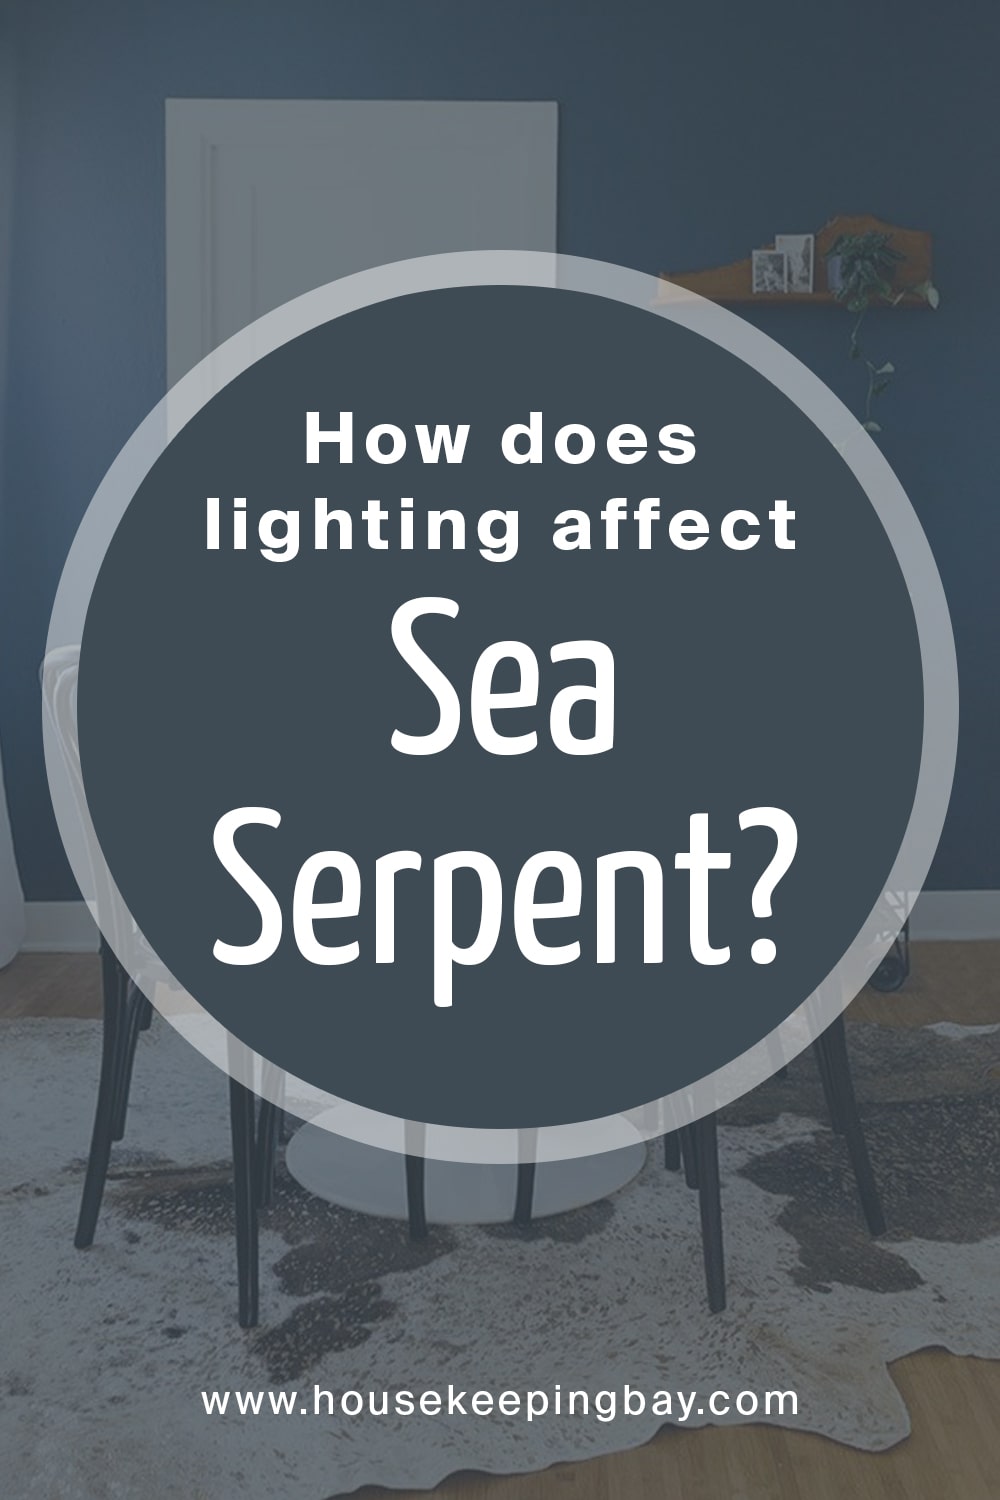 How does lighting affect Sea Serpent